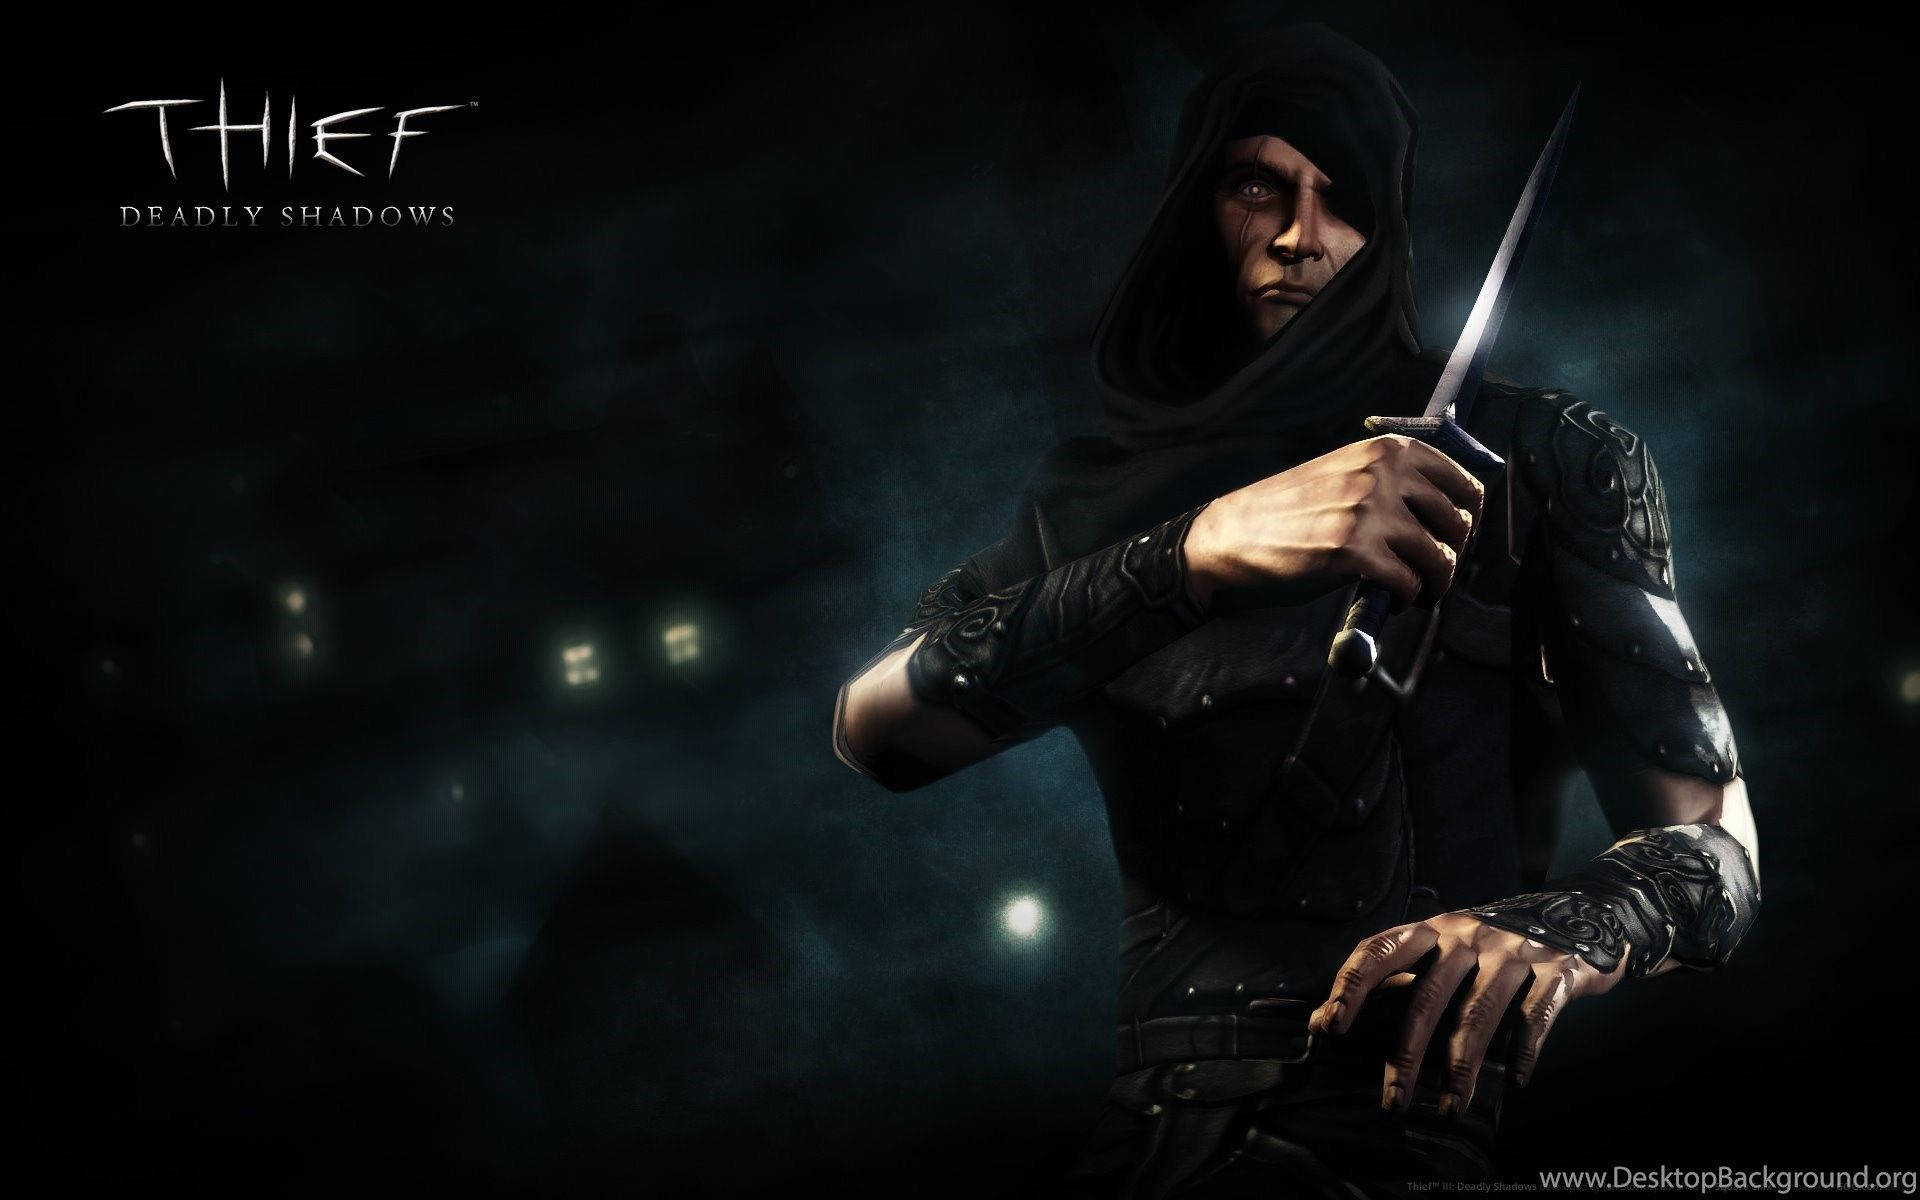 Thief Holding A Knife Wallpaper